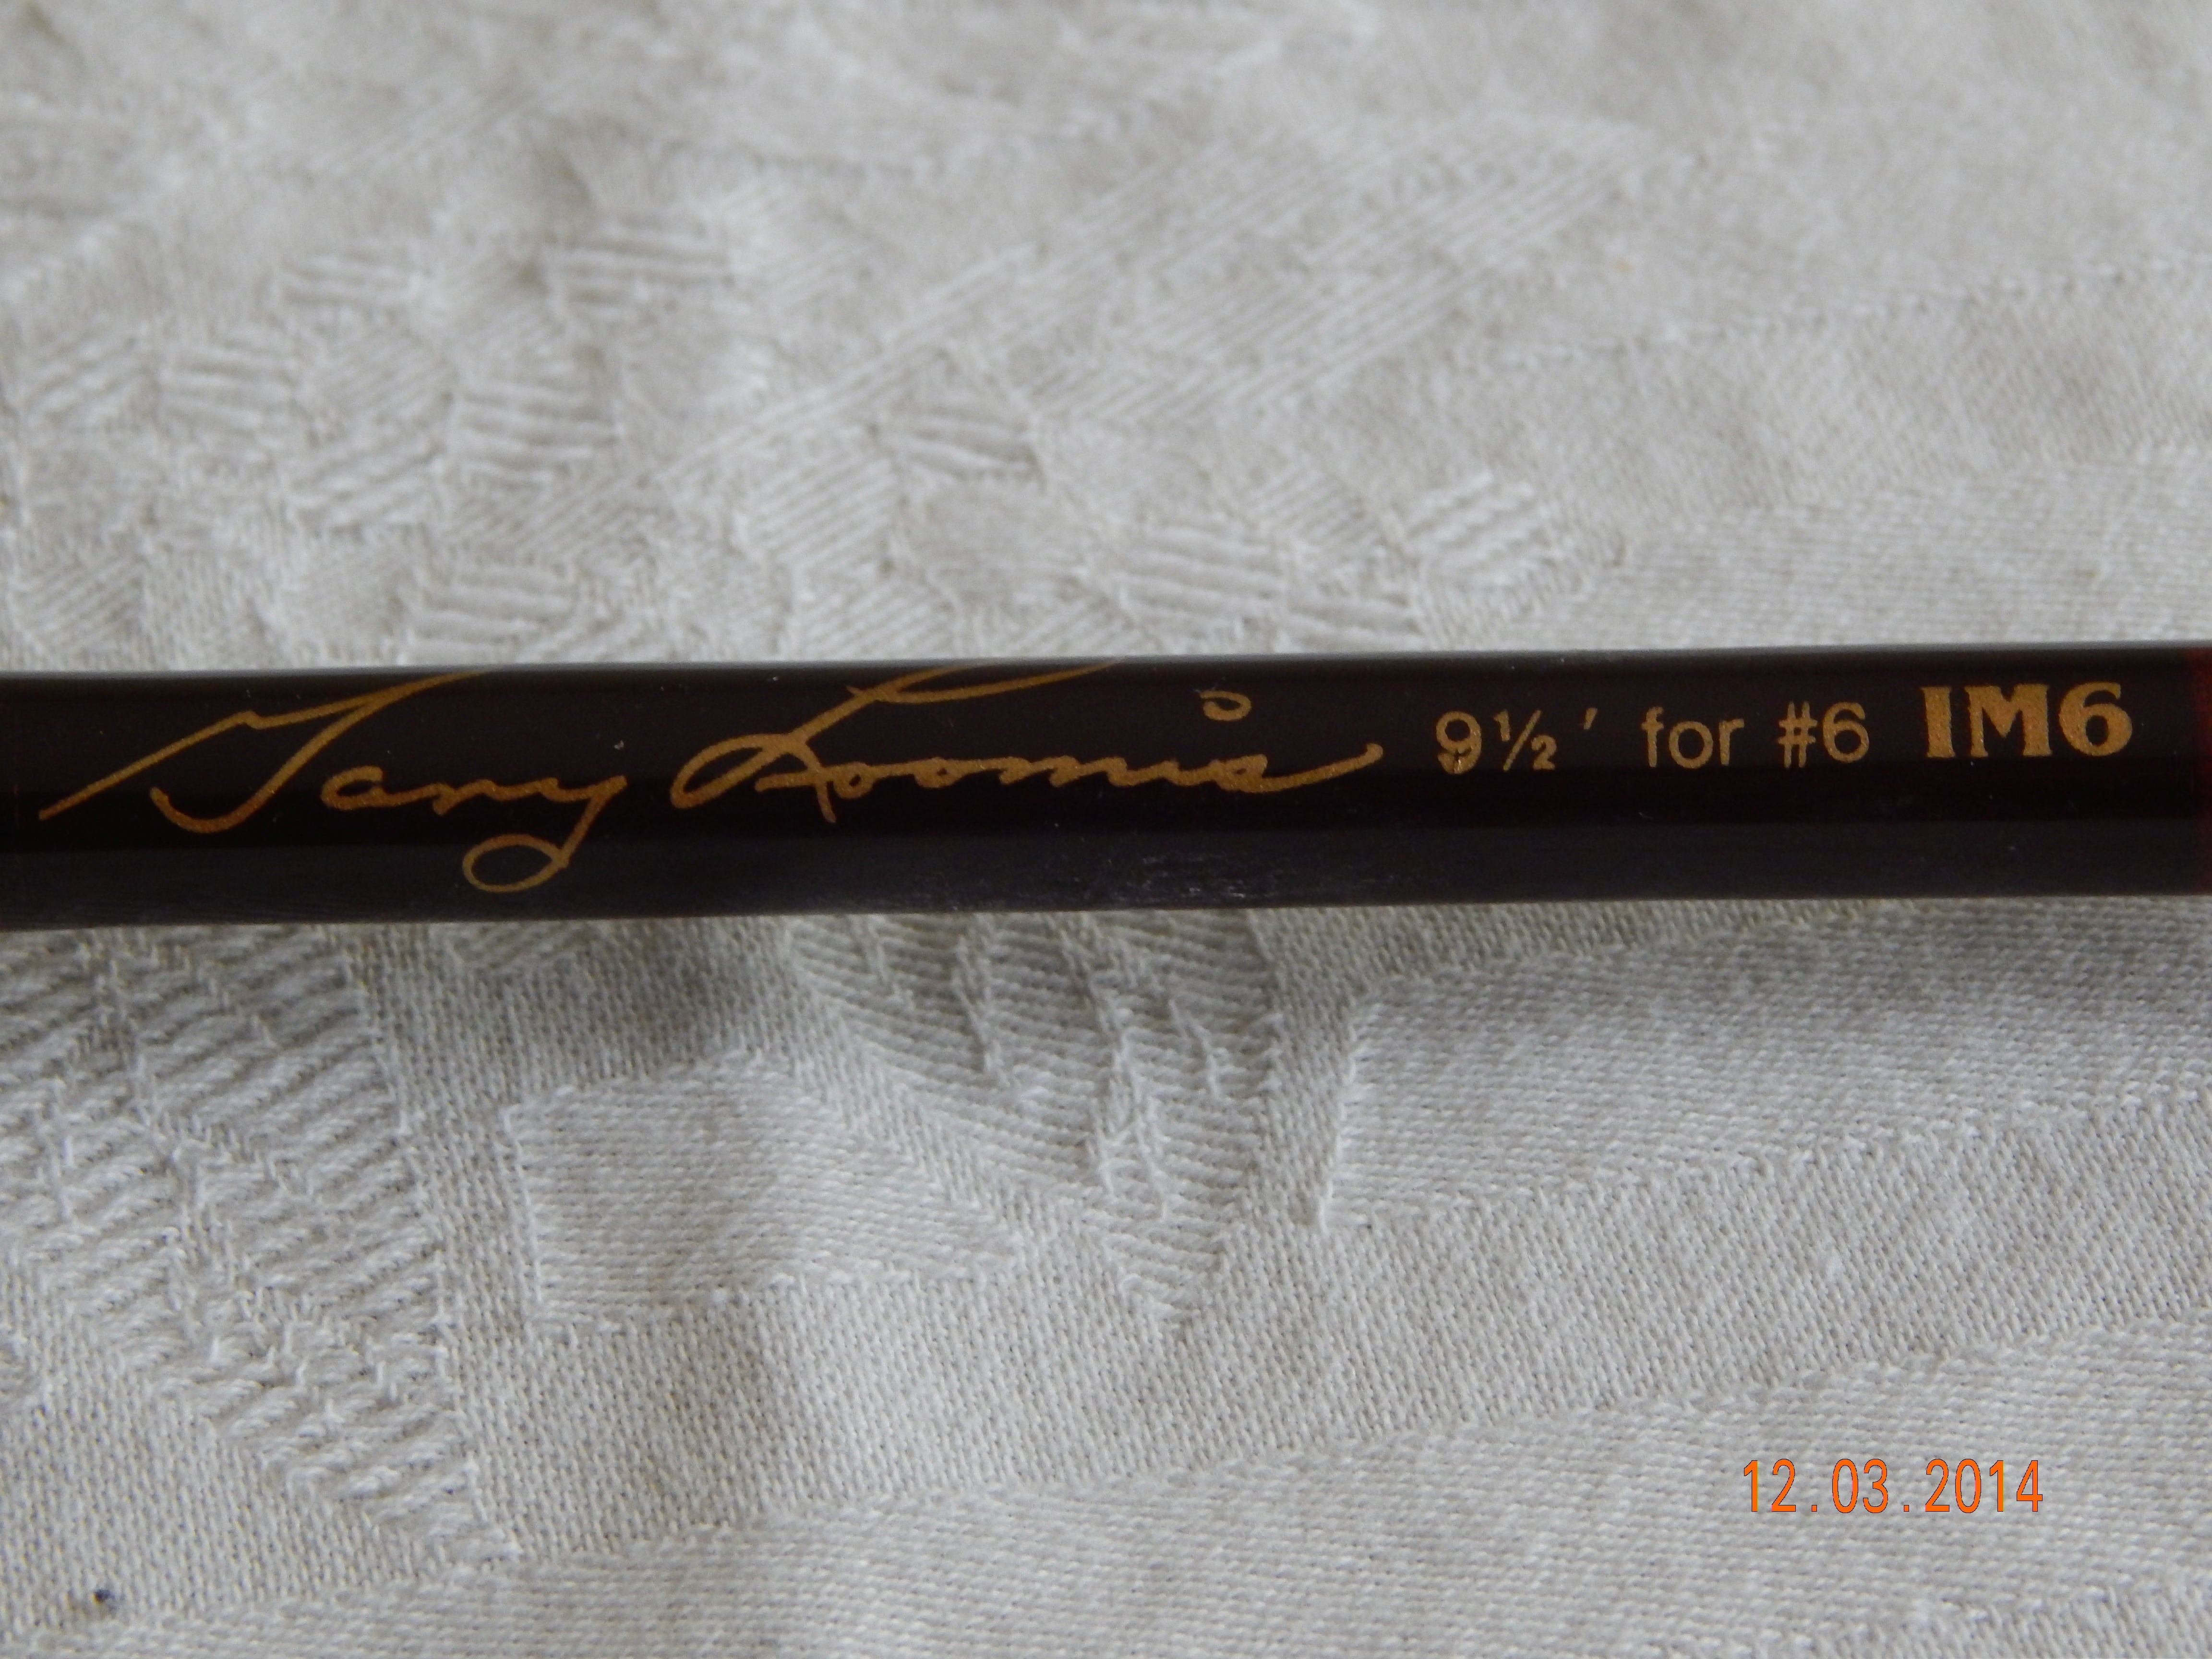 Can anyone tell me about this old Gary Loomis Rod?